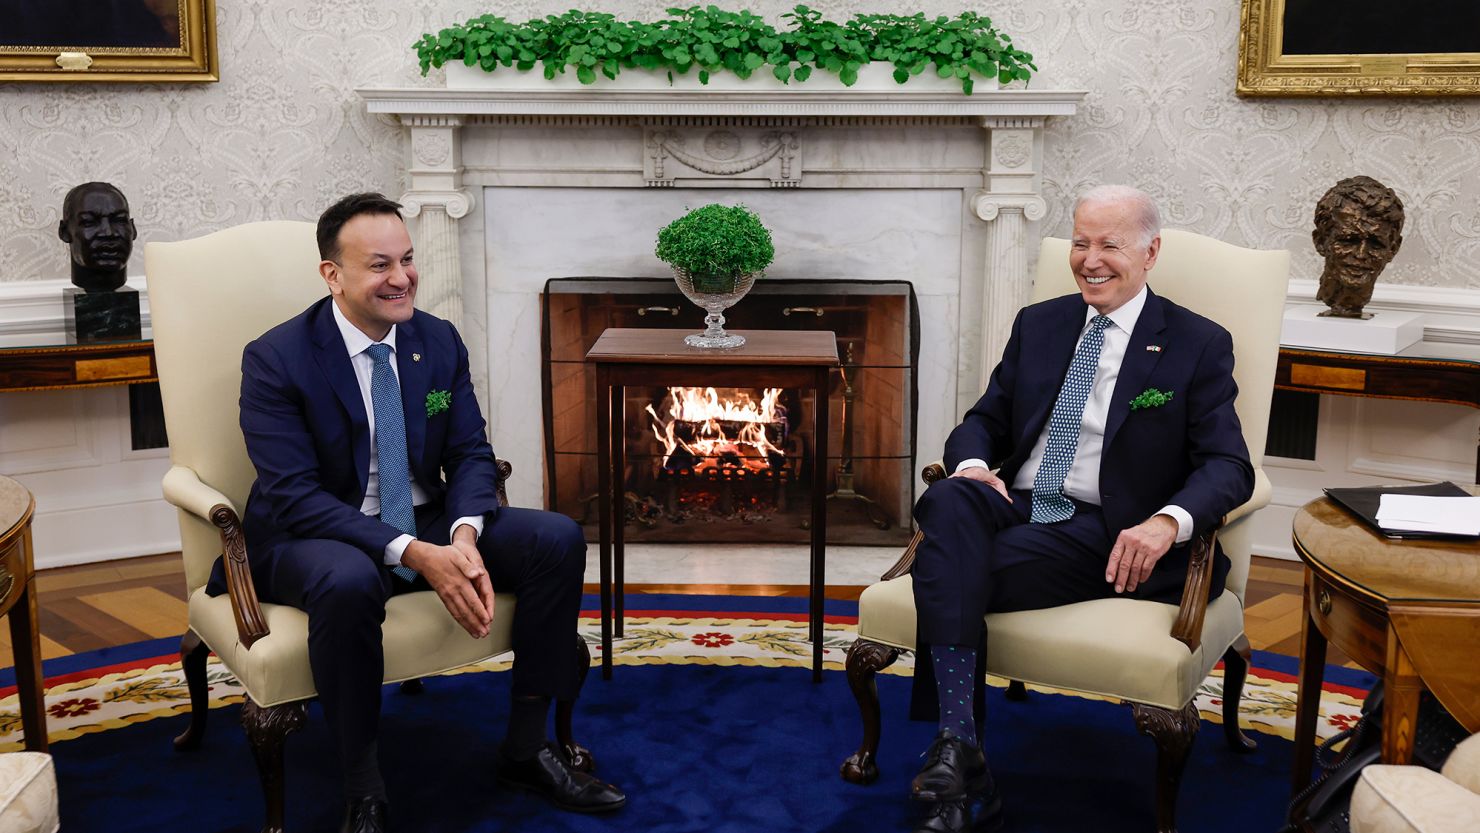 President Joe Biden and Irish Taoiseach Leo Varadkar speak to one another in the Oval Office of the White House on March 17, 2023 in Washington, DC.